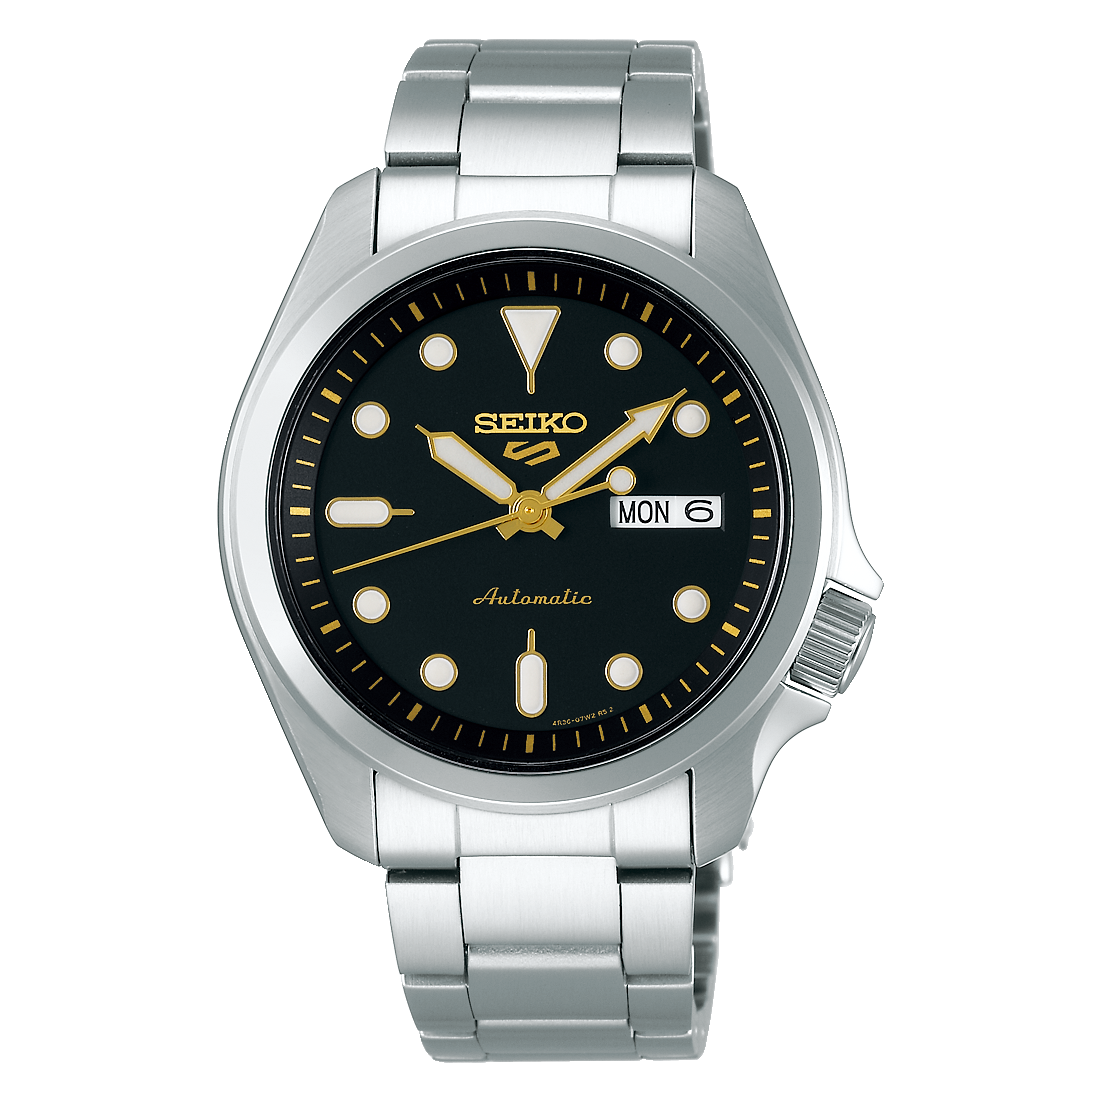 Seiko 5 Sports 40mm Full Stainless Steel Black Dial Automatic Watch - SRPE57K1